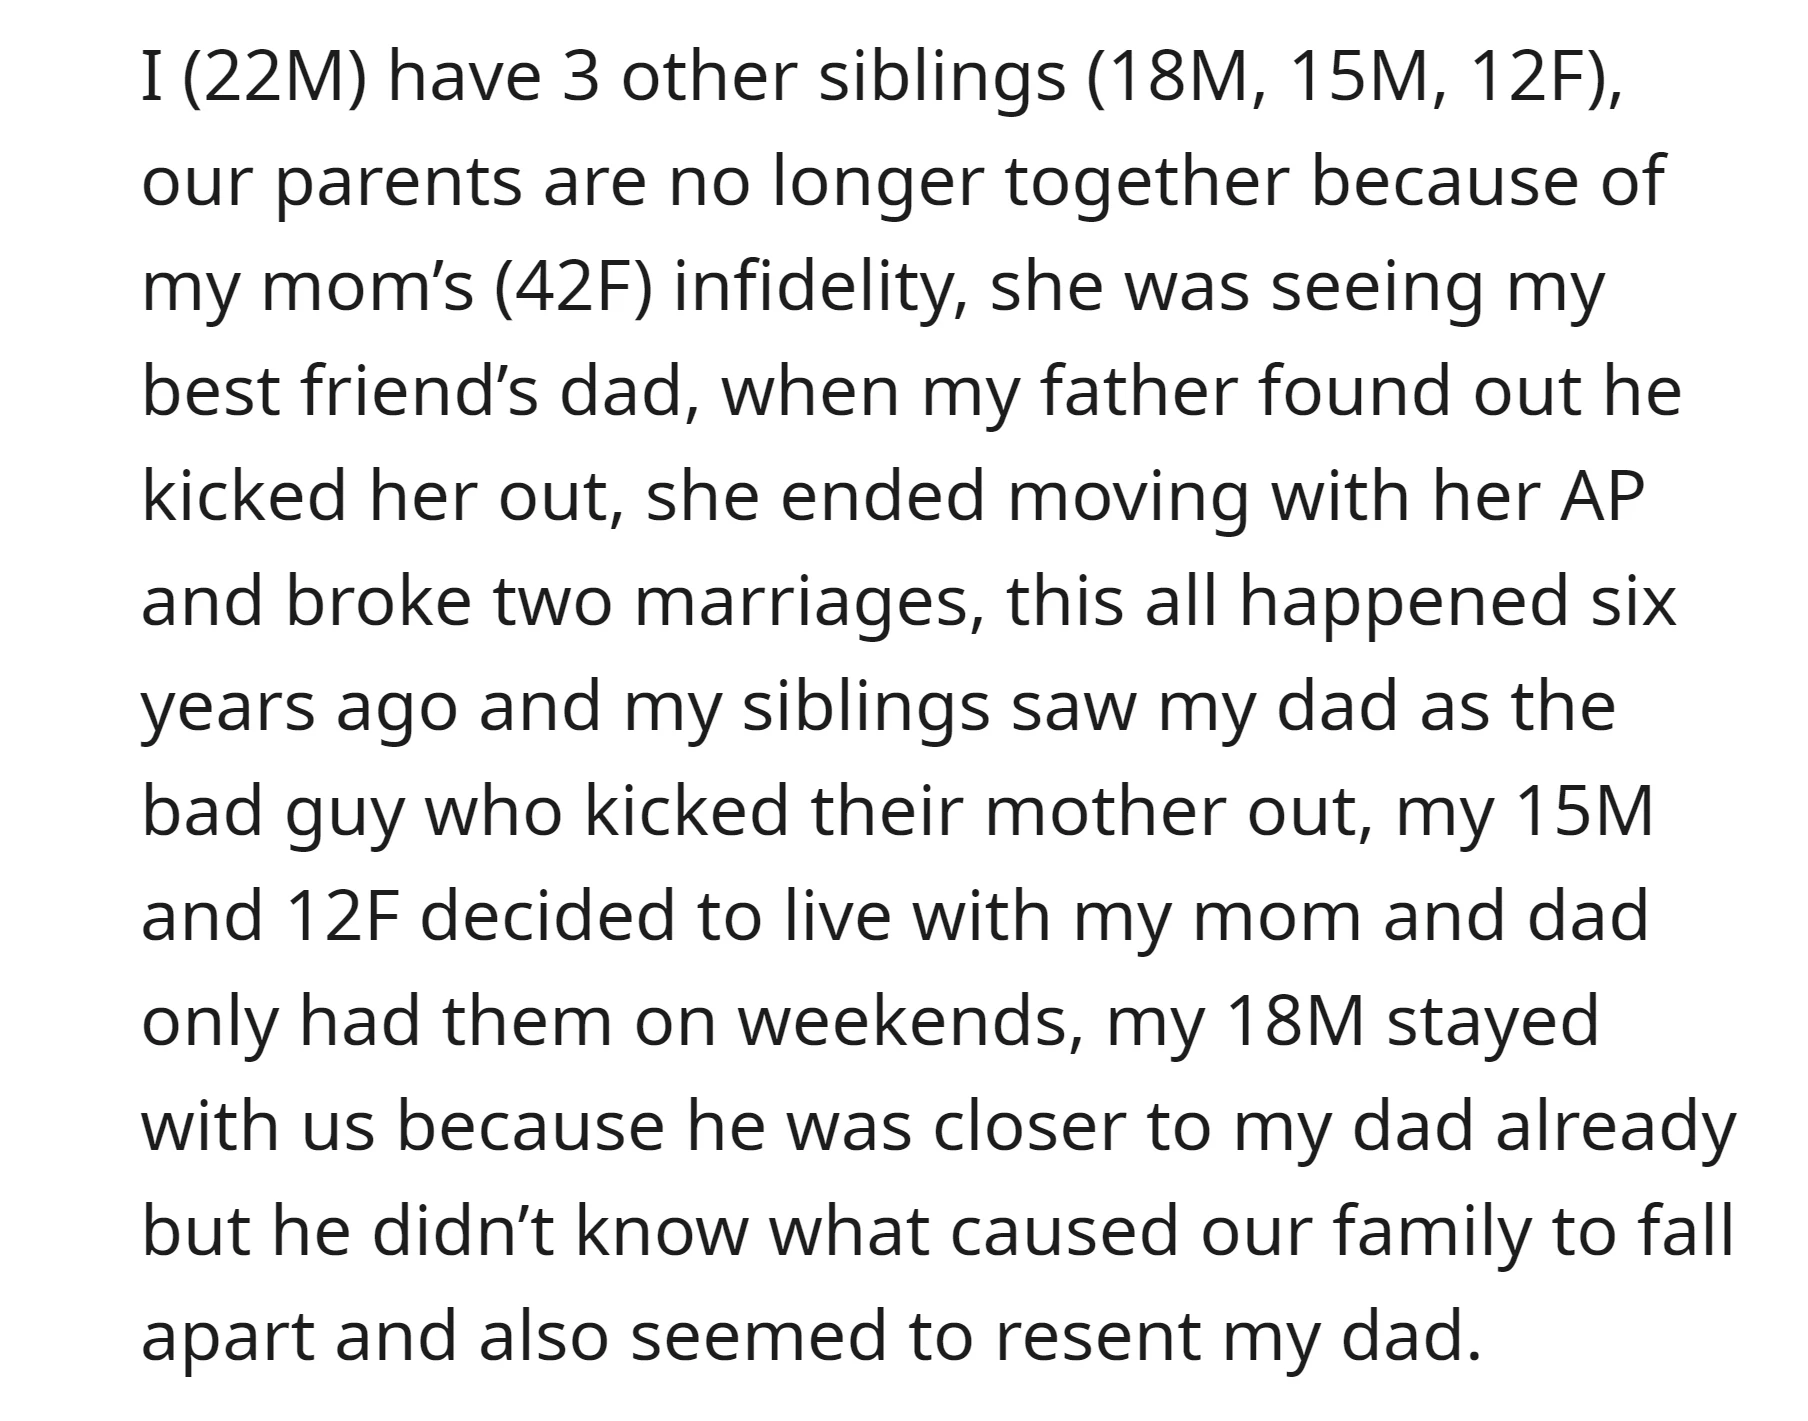 OP's parents separated six years ago